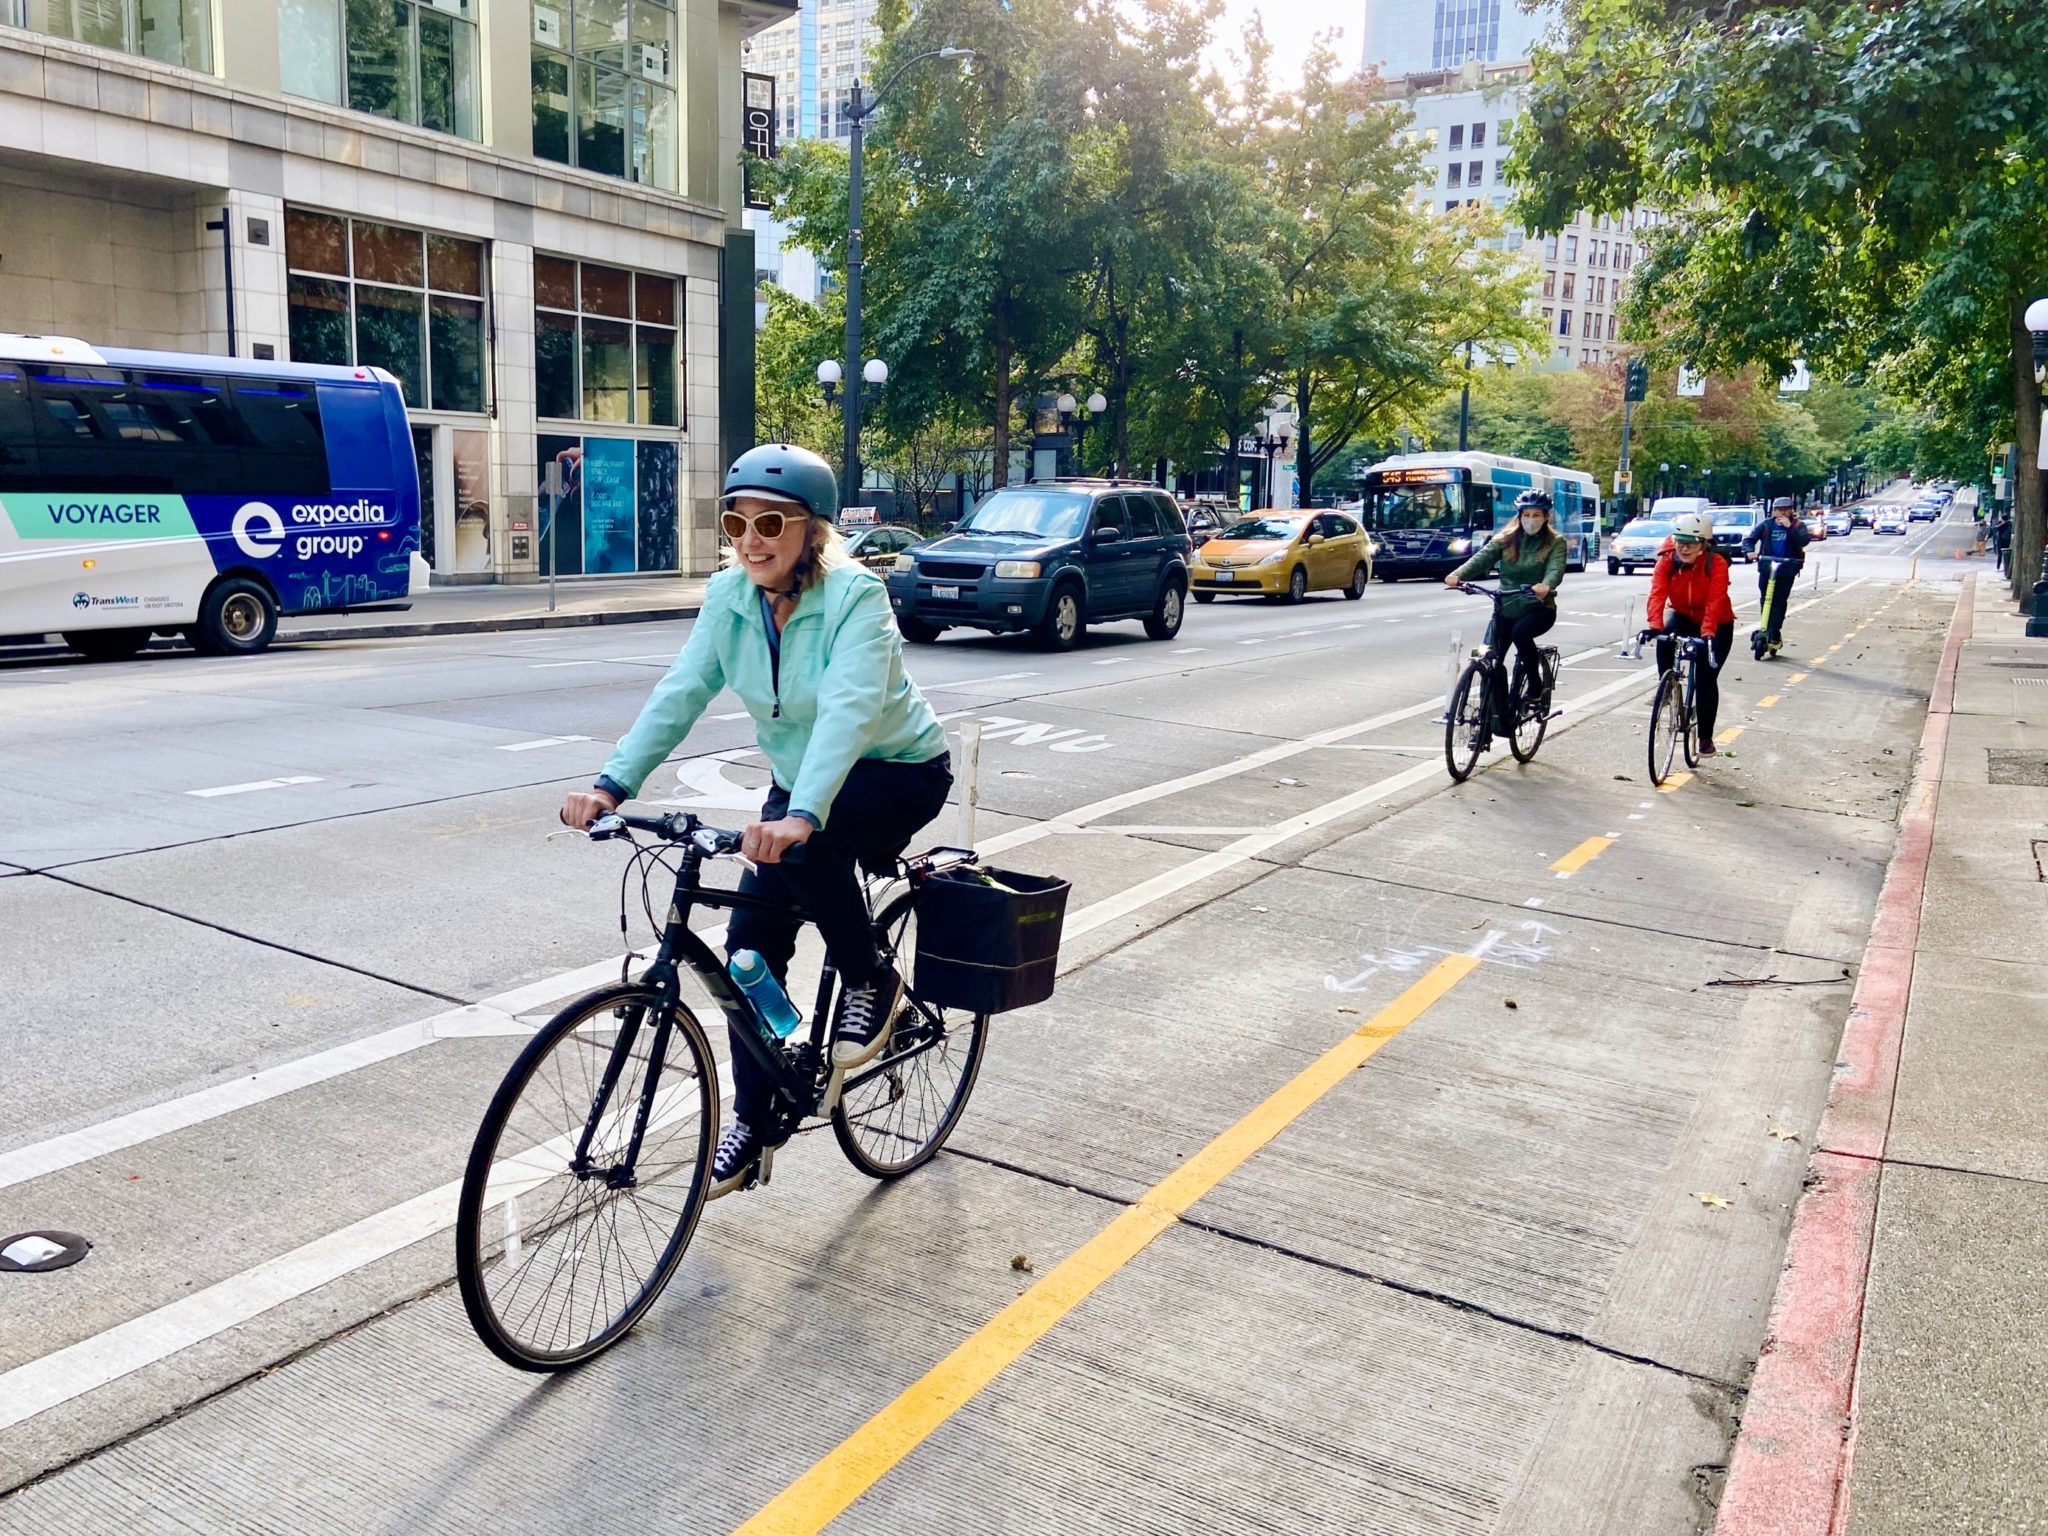 Several people bike along a protected bike lane with buses and cars traveling along the street next to them, in the same direction. Buildings and trees are in the background.